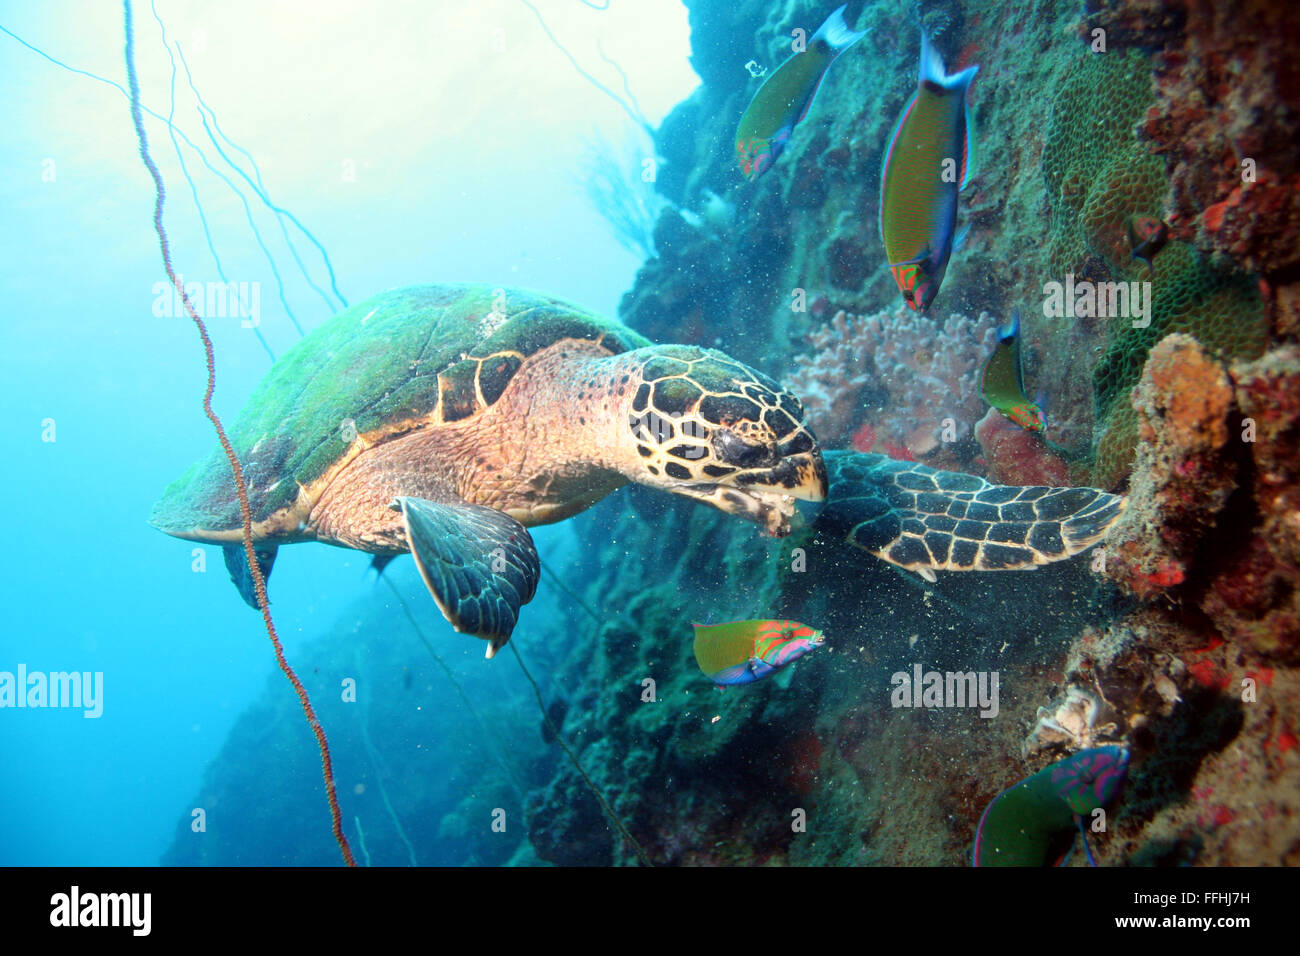 Hawksbill Turtle eating coral Stock Photo